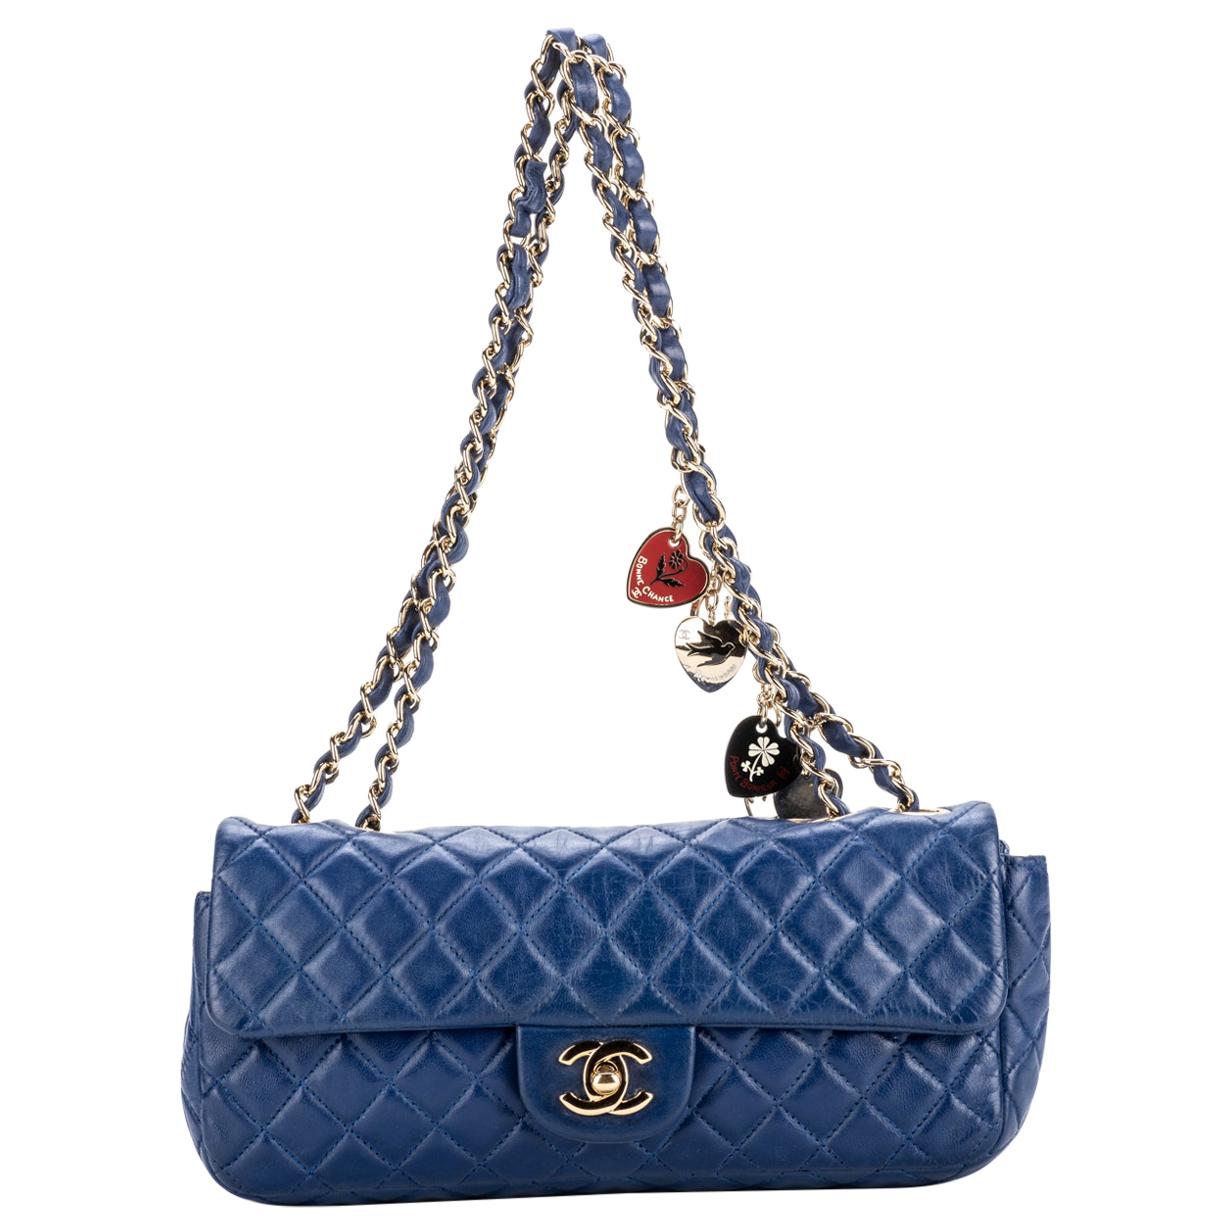 Chanel Blue Limited Edition Heart Charm Flap Bag